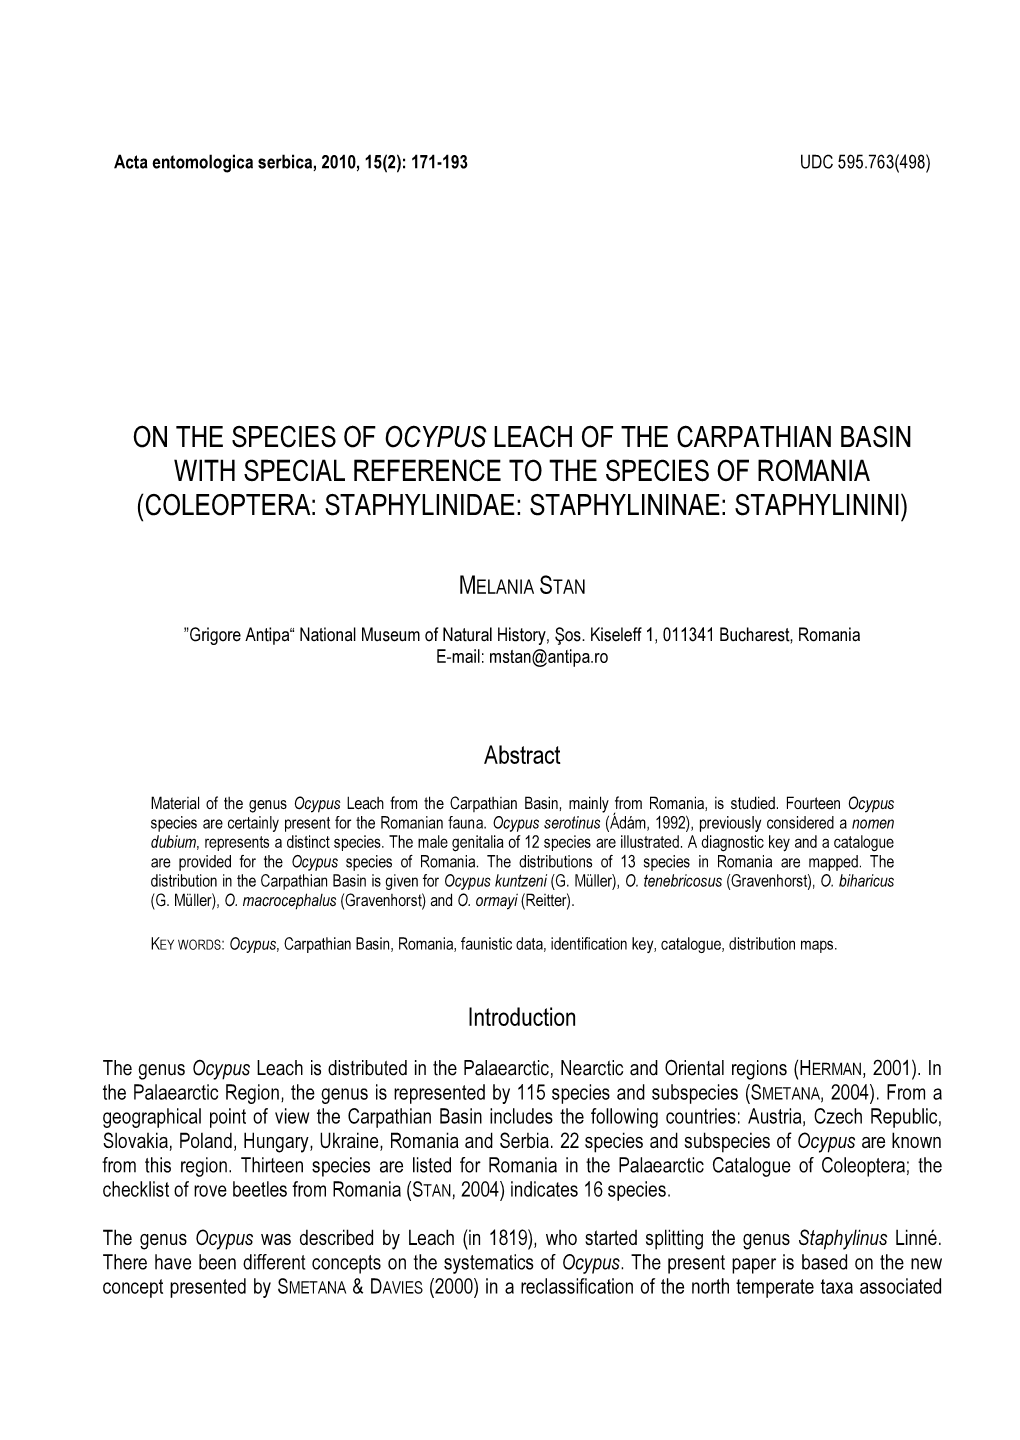 On the Species of Ocypus Leach of the Carpathian Basin with Special Reference to the Species of Romania (Coleoptera: Staphylinidae: Staphylininae: Staphylinini)